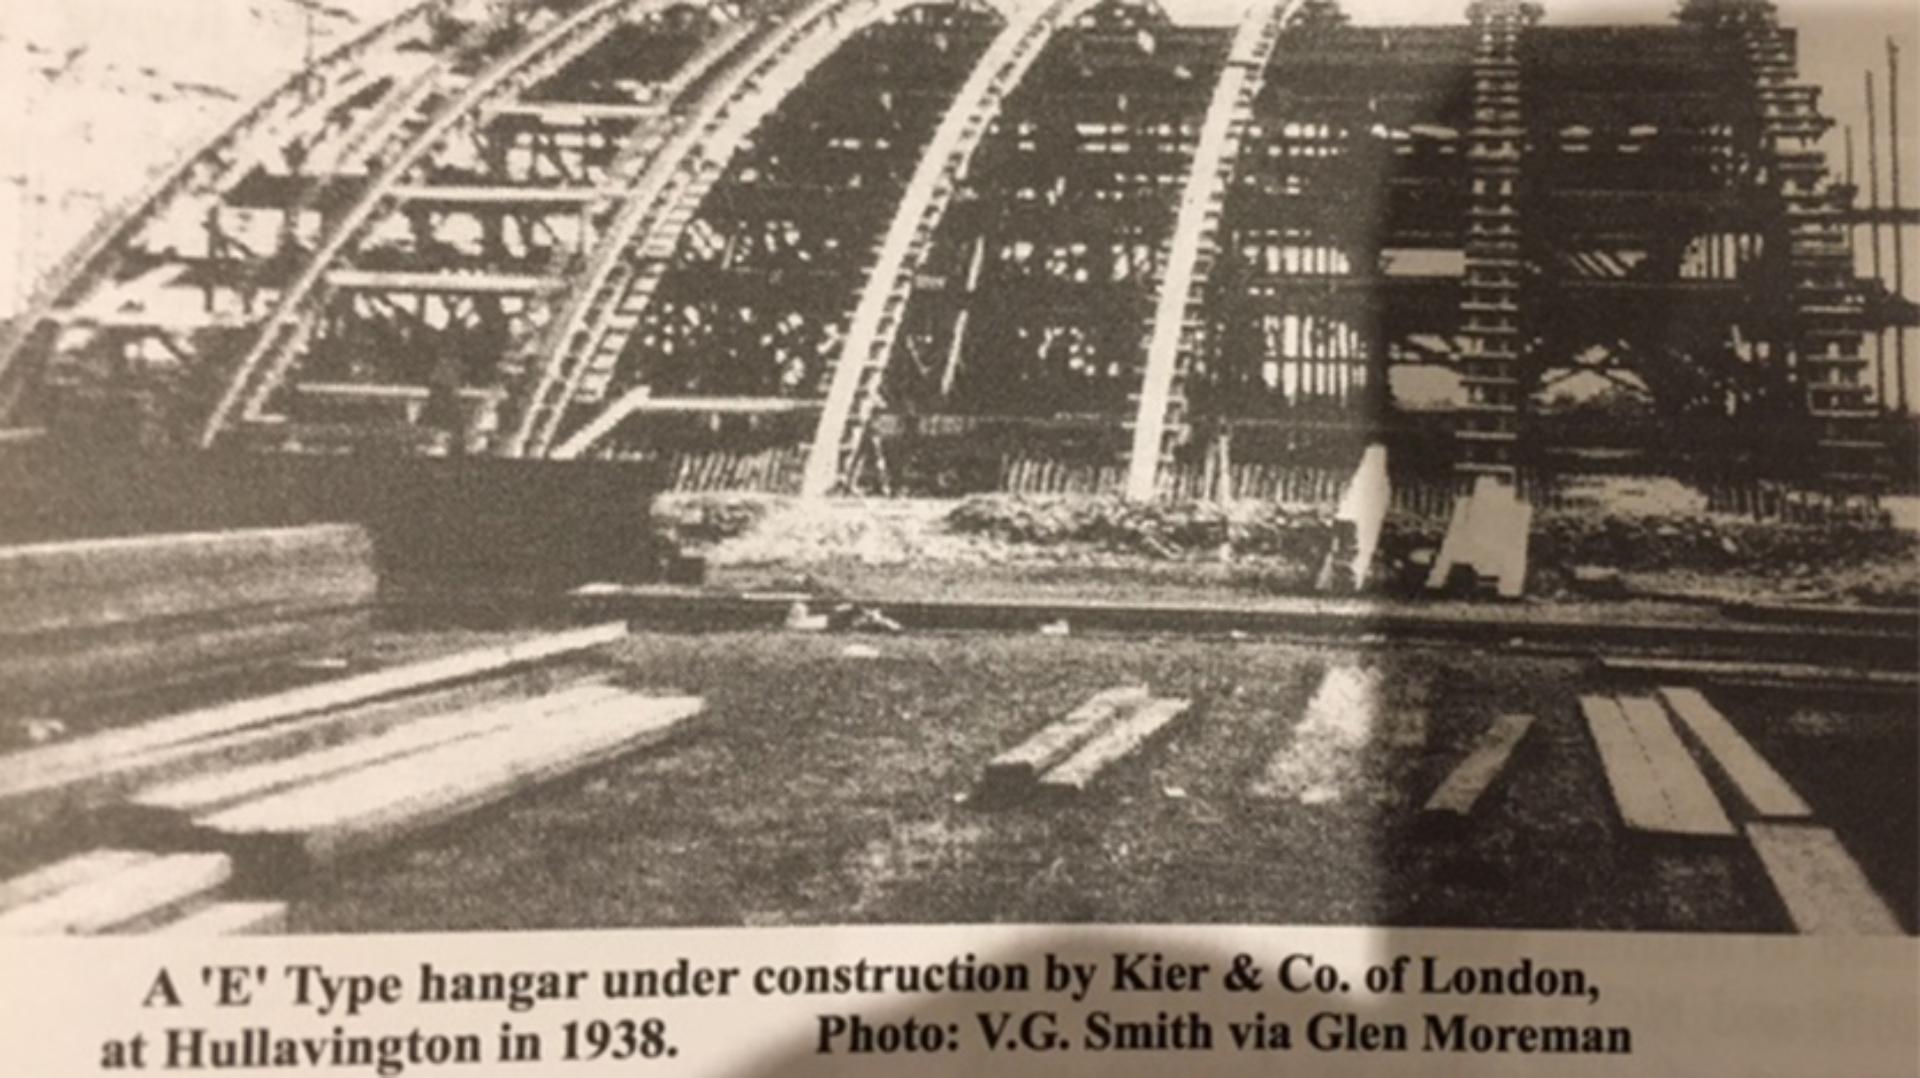 Old photo of Hullavington airfield under construction in 1938